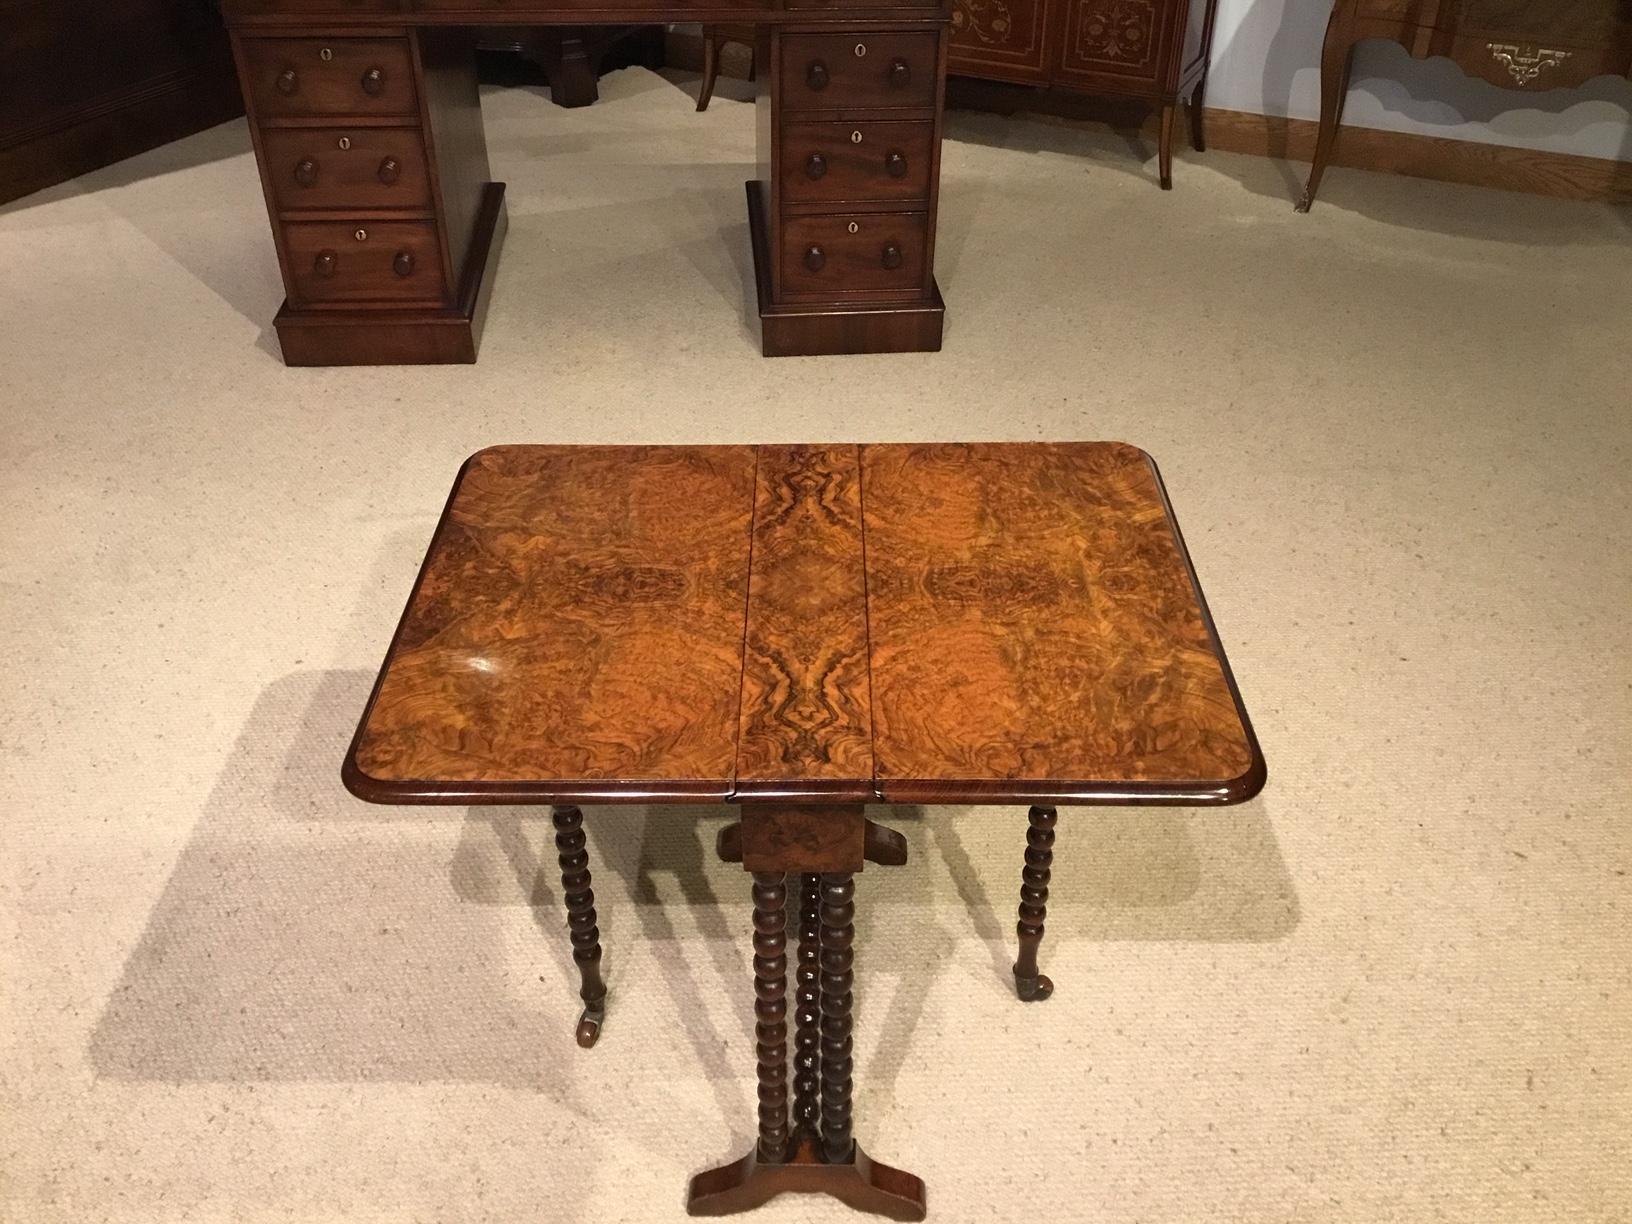 A beautiful burr walnut Victorian period baby Sutherland table. Having a rectangular hinged top with twin drop leaves veneered in book matching burr walnut veneers. Supported on bobbin turned walnut supports. England, circa 1880

Dimensions: 20